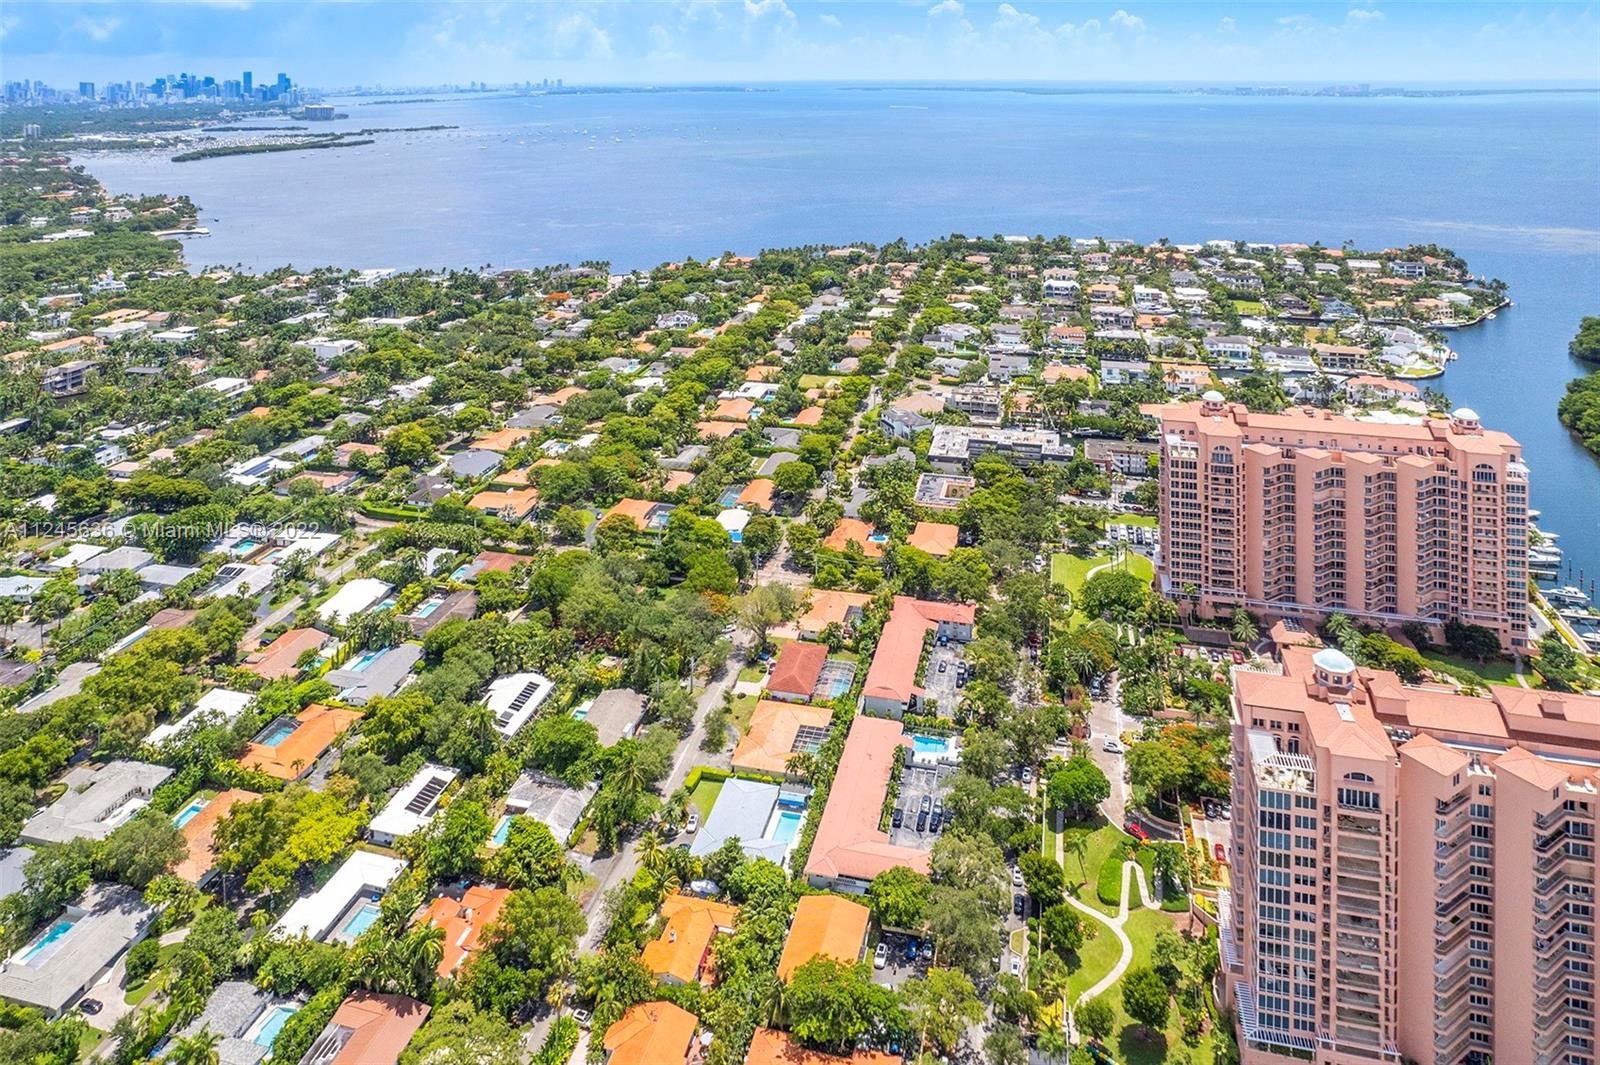 HAVE THE BEST OF BOTH WORLDS LIVING ON EXCLUSIVE EDGEWATER DRIVE AND BASK IN THE BEST OF WHAT CORAL GABLES AND COCONUT GROVE HAVE TO OFFER! THIS BAYFRONT COMMUNITY IS STEPS TO OUR SPARKLING BISCAYNE BAY, COCONUT GROVE SHOPPING AND ENTERTAINMENT VILLAGE, MIRACLE MILE, DOWNTOWN BRICKELL AND THE CITY’S BEST PARKS! THIS 1/1 IS MOVE-IN READY, SUPER SPACIOUS WITH INCREDIBLE NATURAL LIGHT, GREAT CLOSET SPACE AND BEAUTIFUL KITCHEN AND BATH. THE BUILDING IS IN PRESTINE CONDITION AND METICULOUSLY MAINTAINED, SPARKLING POOL, BRAND NEW DOGGIE ZONE, NEW LAUNDRY ROOM, ASSIGNED PARKING, GUEST PARKING… THE WORKS!! AMAZING OPPORTUNITY TO OWN YOUR OWN HOME IN THE BEST AREA OF MIAMI!